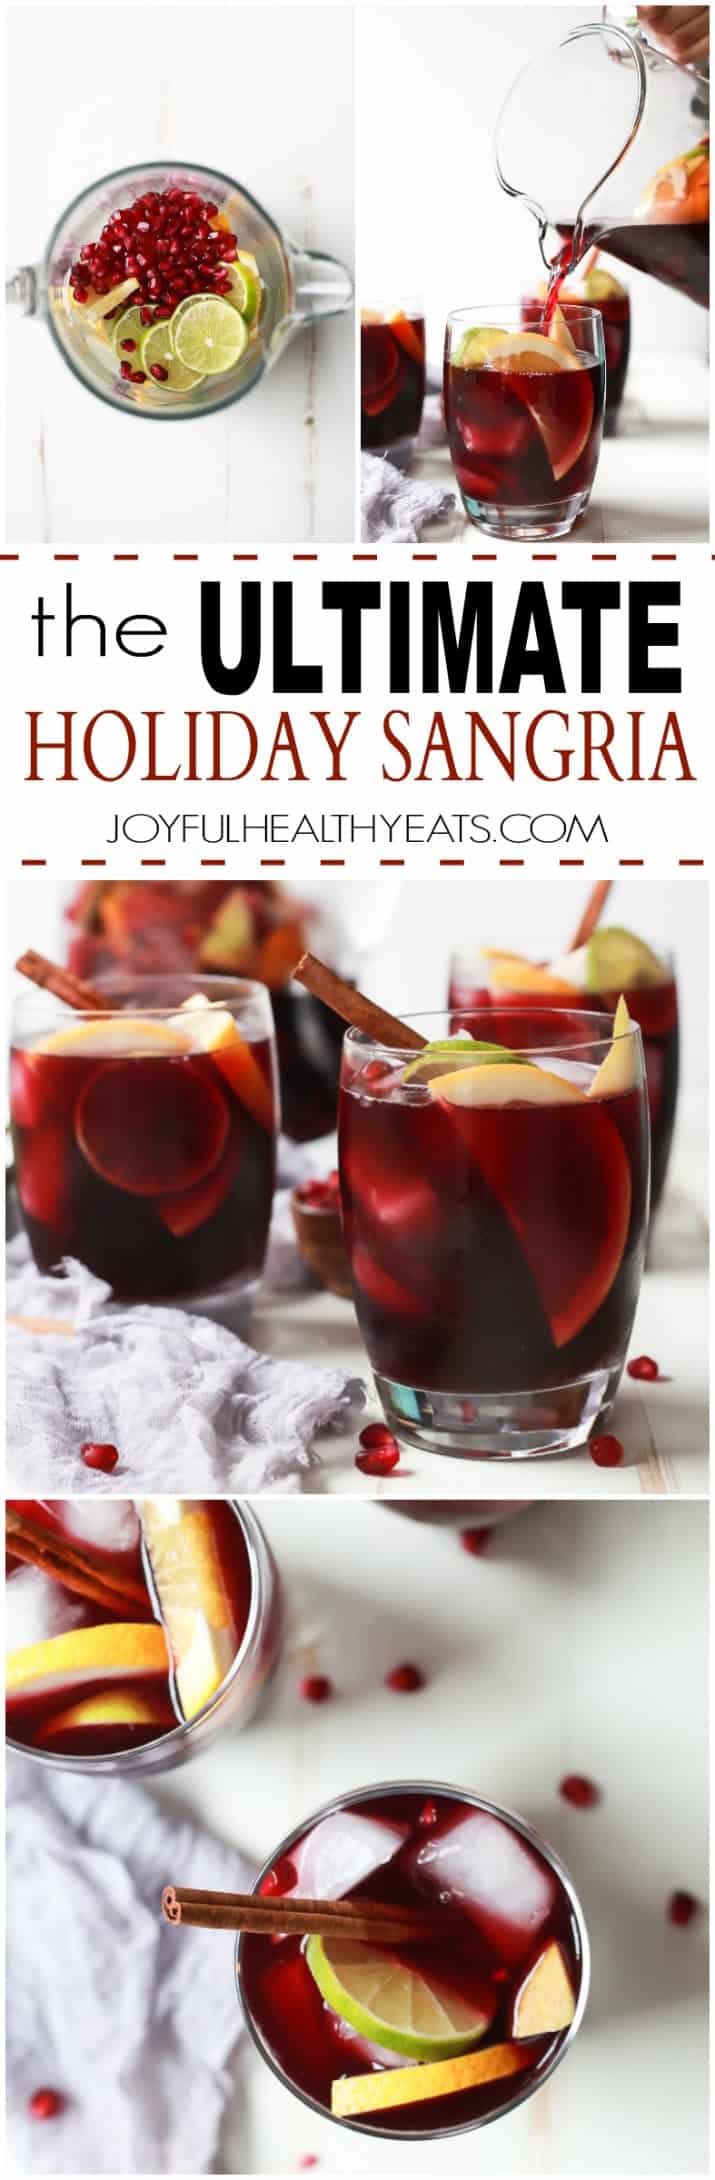 The Ultimate Holiday Sangria Recipe filled with citrus, pomegranate, crisp pear, and cinnamon for one irresistible sip! Find out my secret method to making the BEST sangria! | joyfulhealthyeats.com